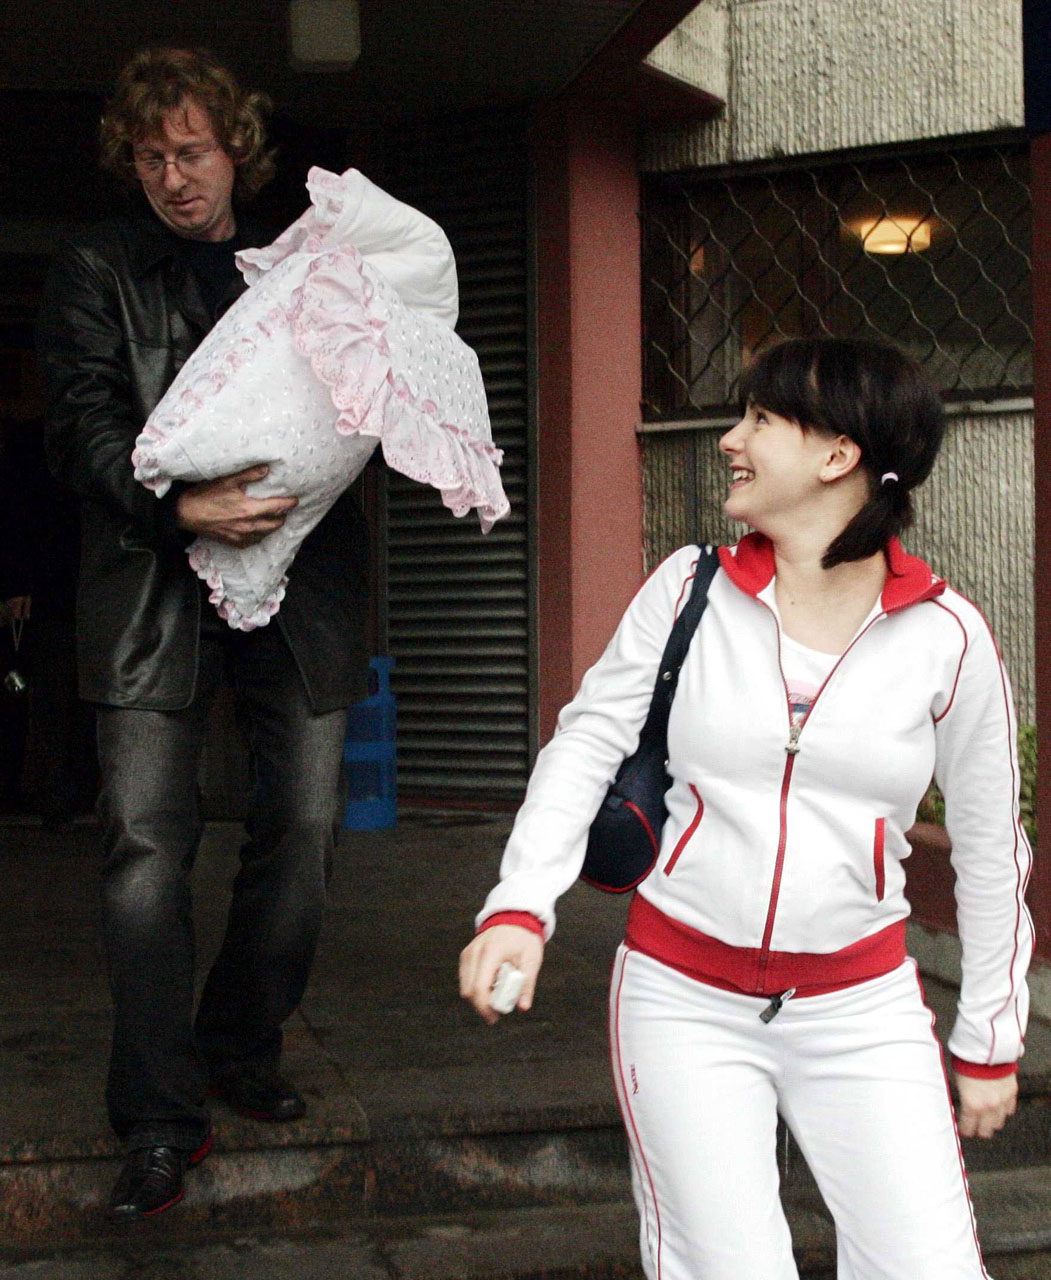 Yulia Volkova After Giving Birth to a Daughter 27.09.2004